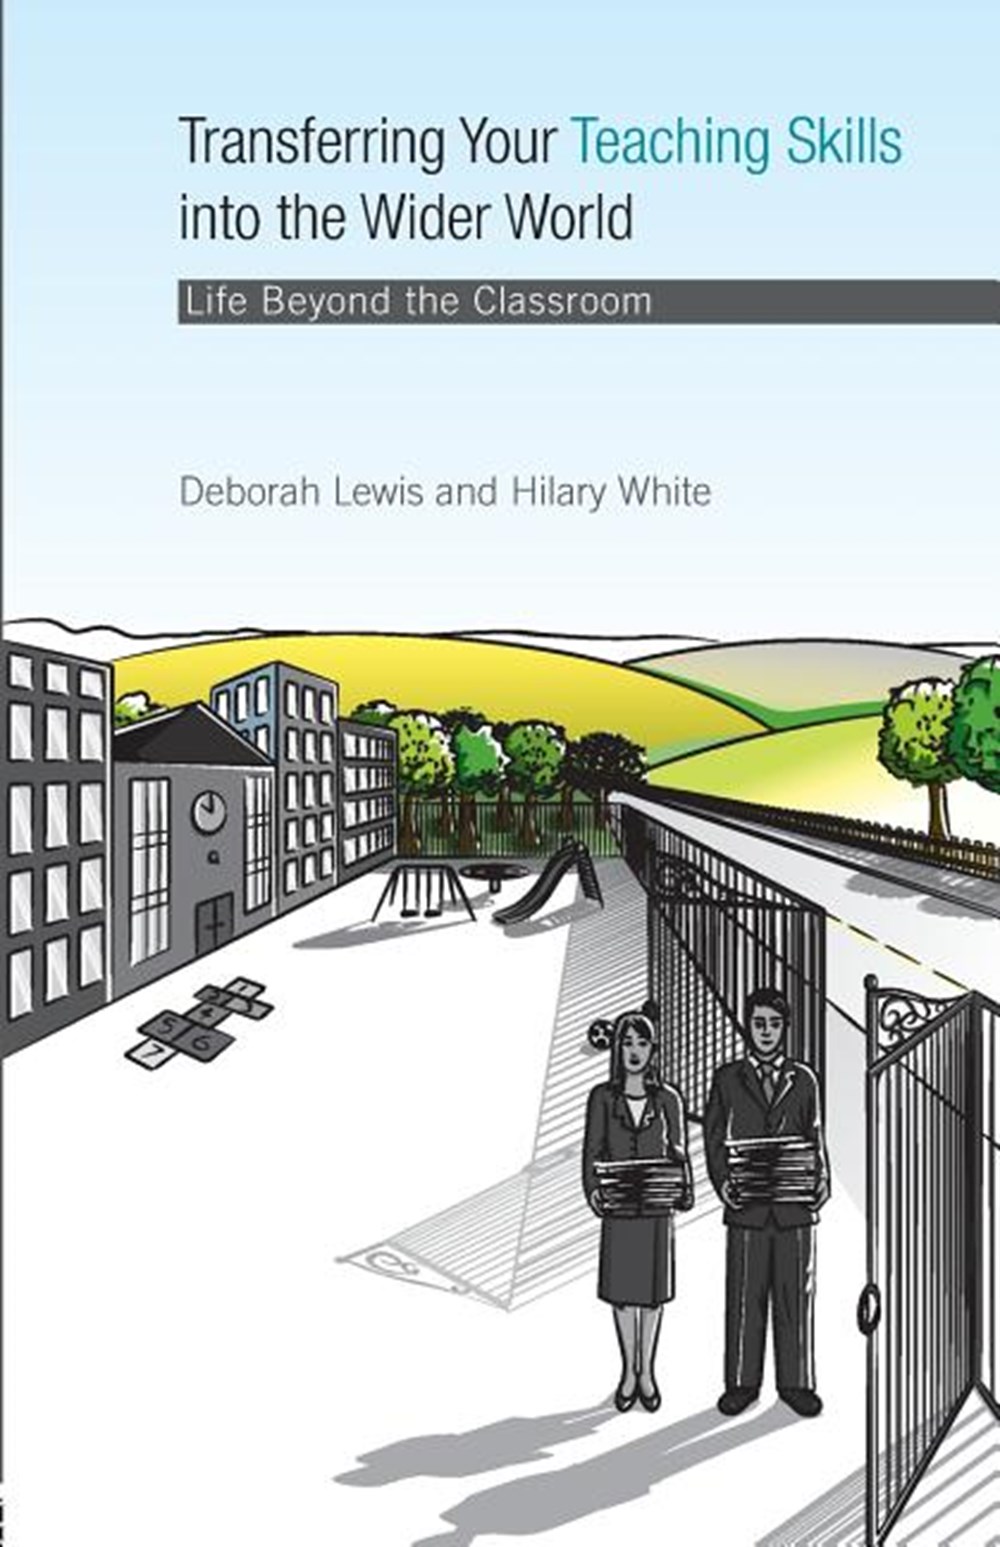 Transferring your Teaching Skills into the Wider World: Life Beyond the Classroom